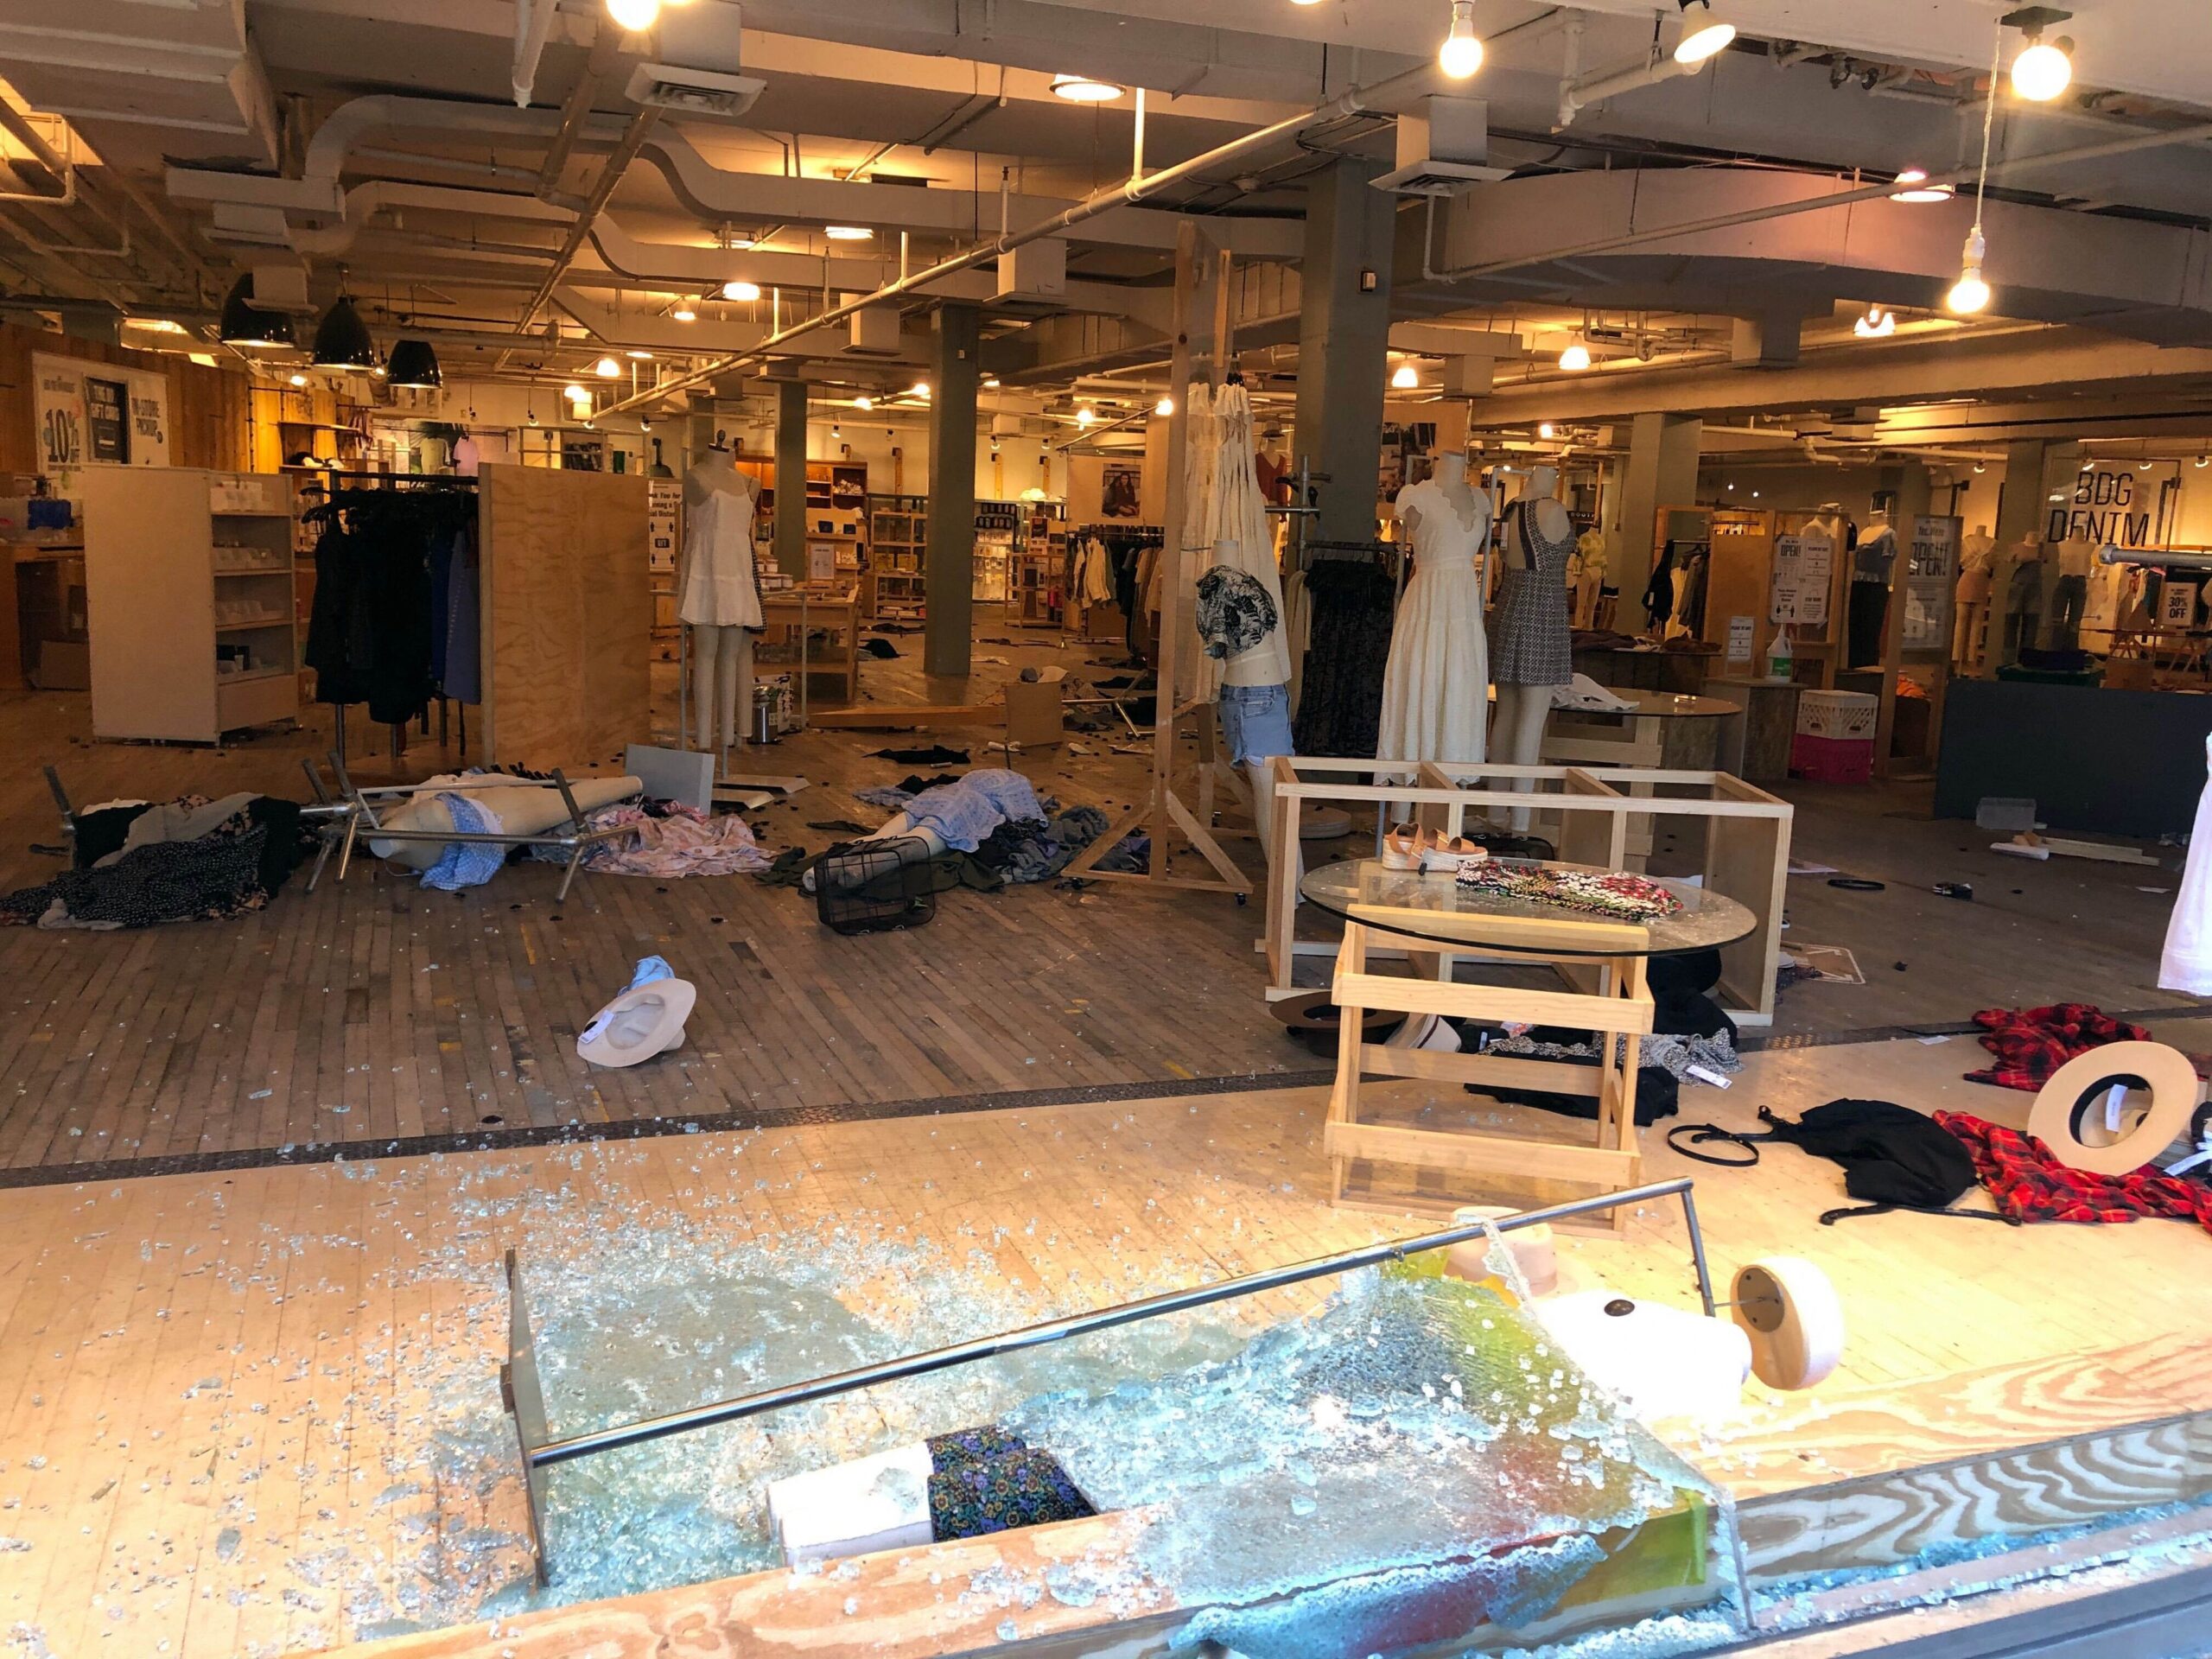 Urban Outfitters was one of several businesses damaged and looted